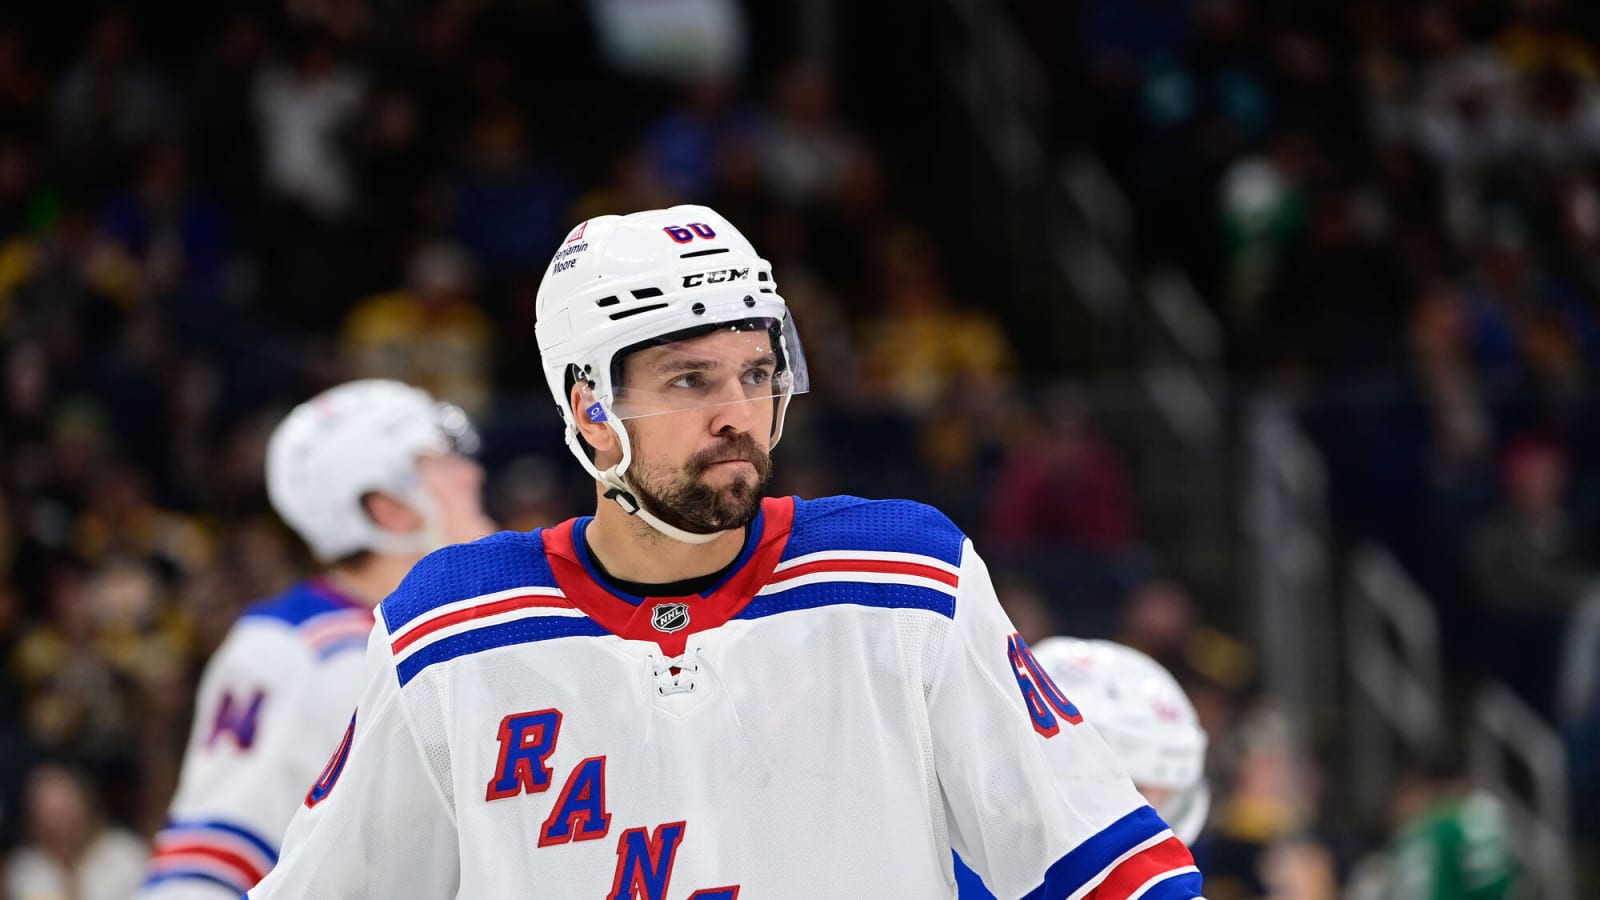 Rangers: 3 AHL players who could get called up this season